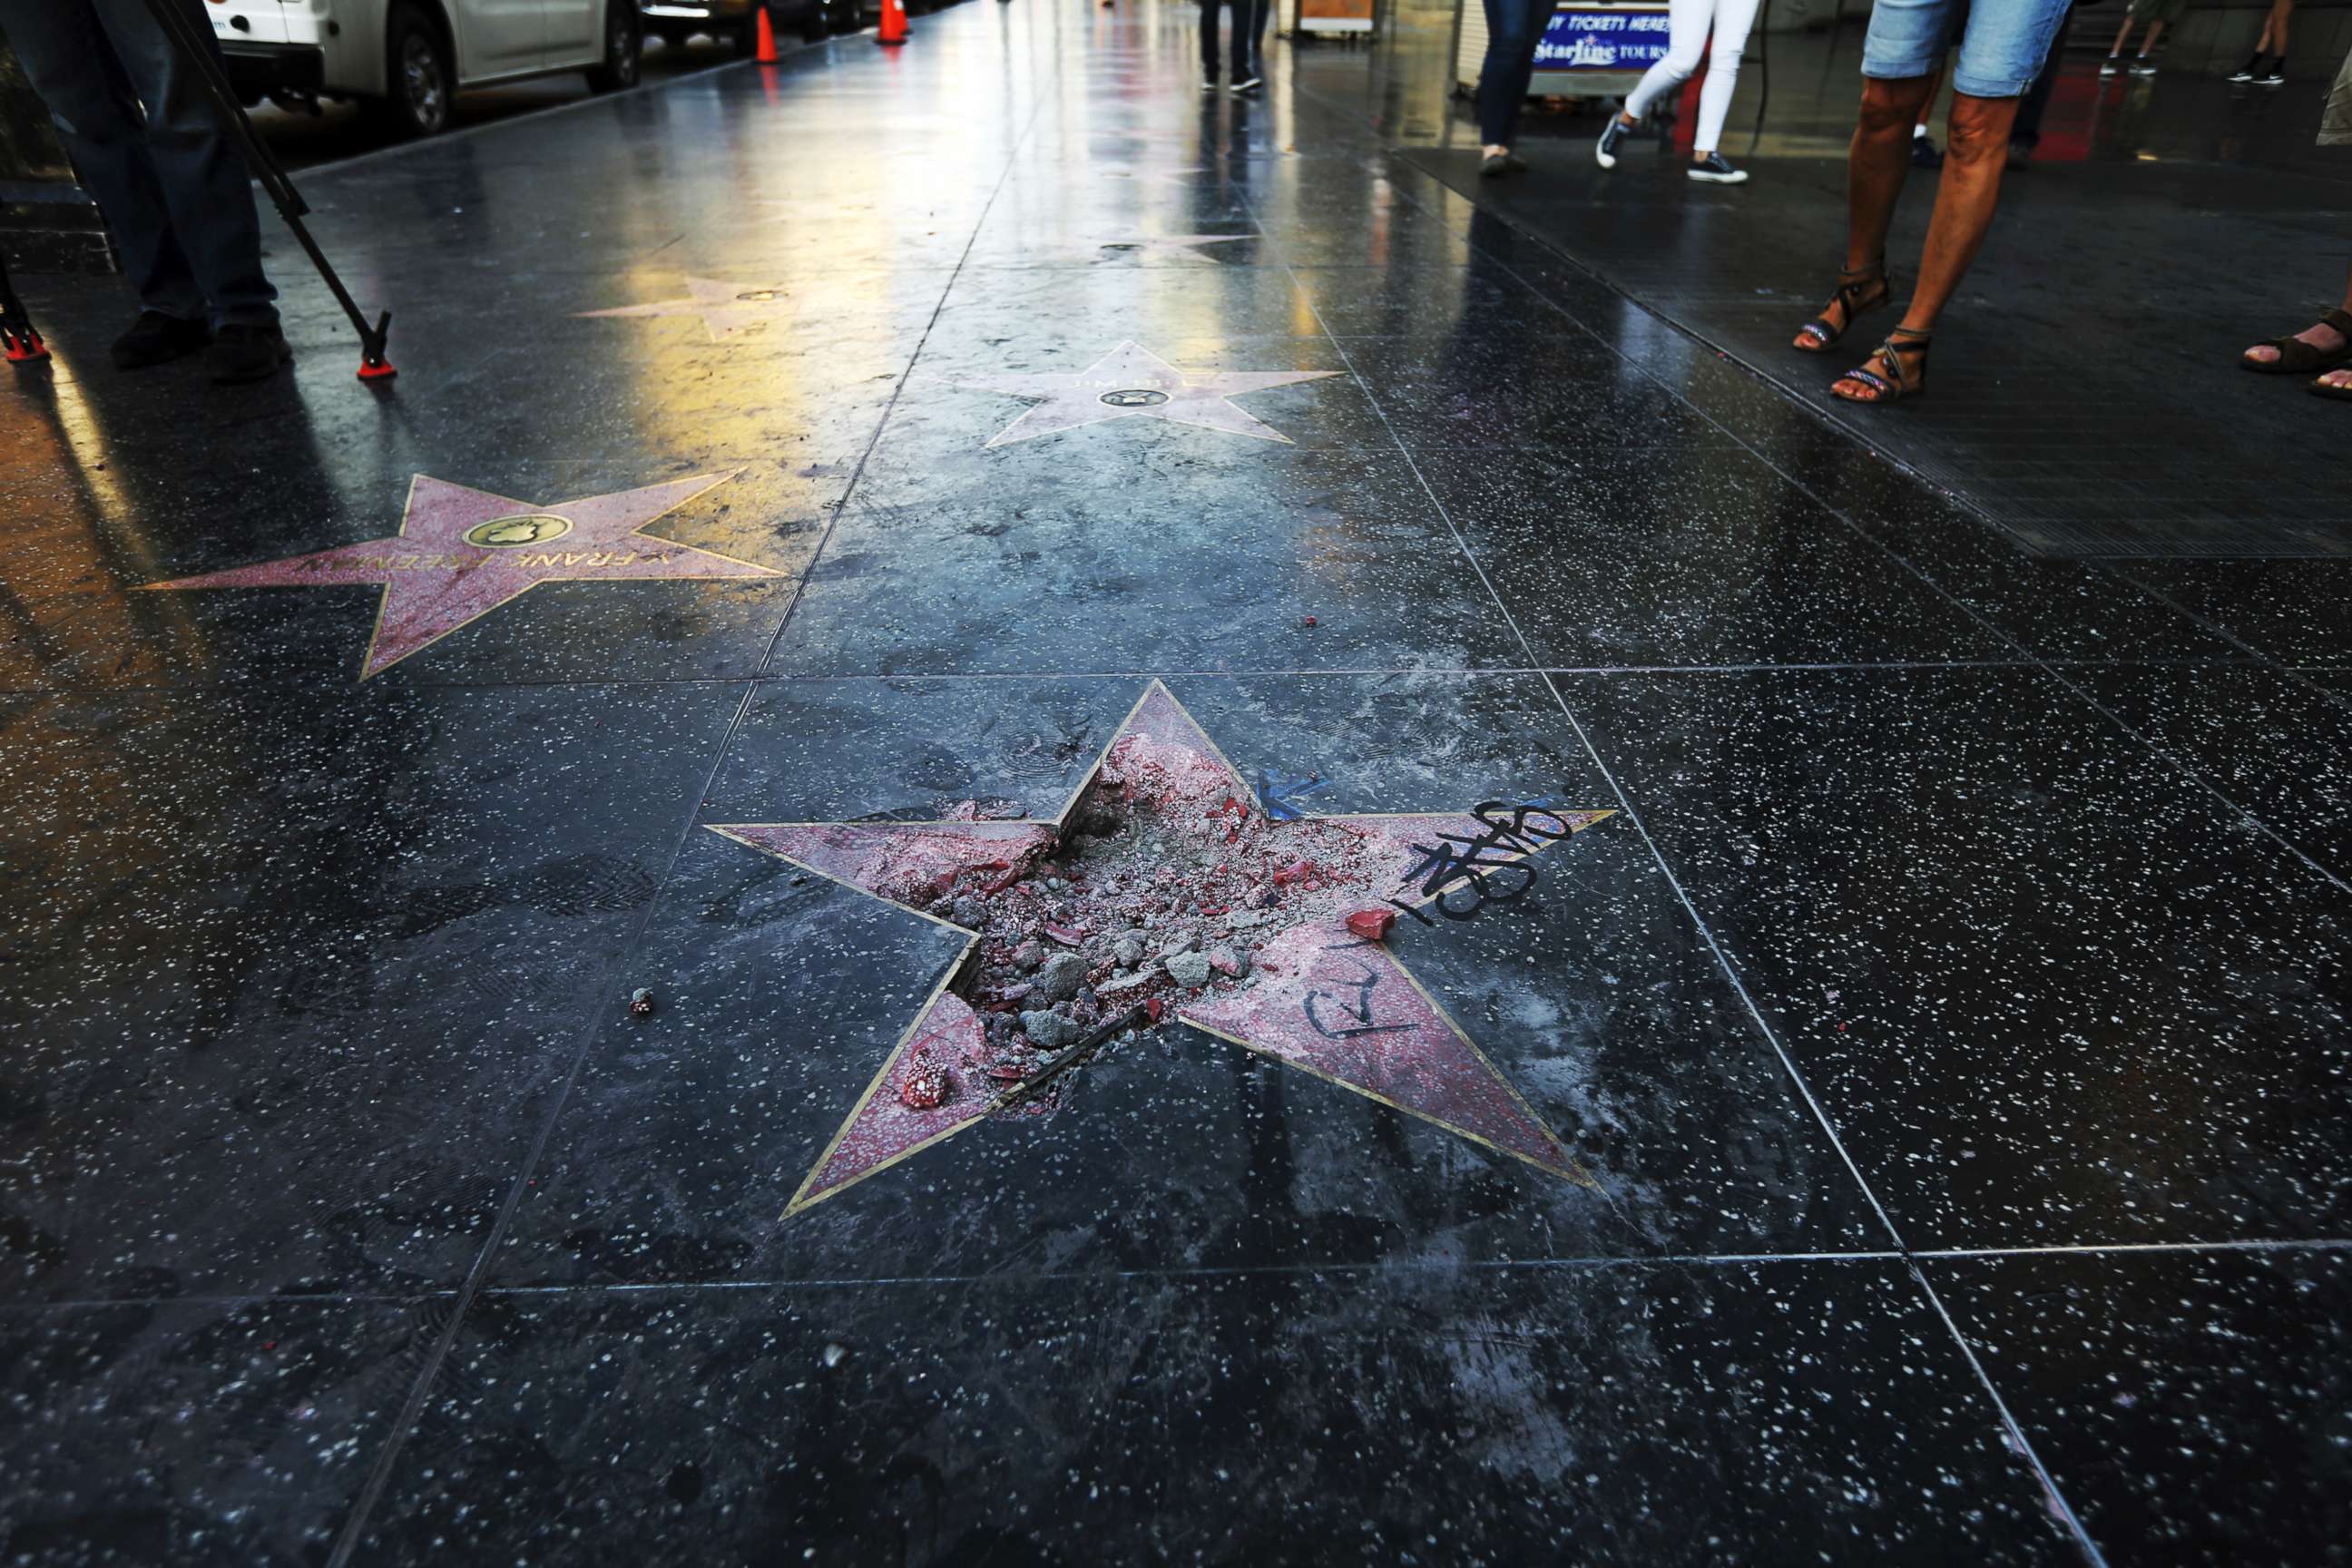 PHOTO: The damage done to Donald Trump's star on the Hollywood Walk of Fame that was vandalized, July 25, 2018, in Los Angeles. Authorities said a pickax was used in the vandalism.